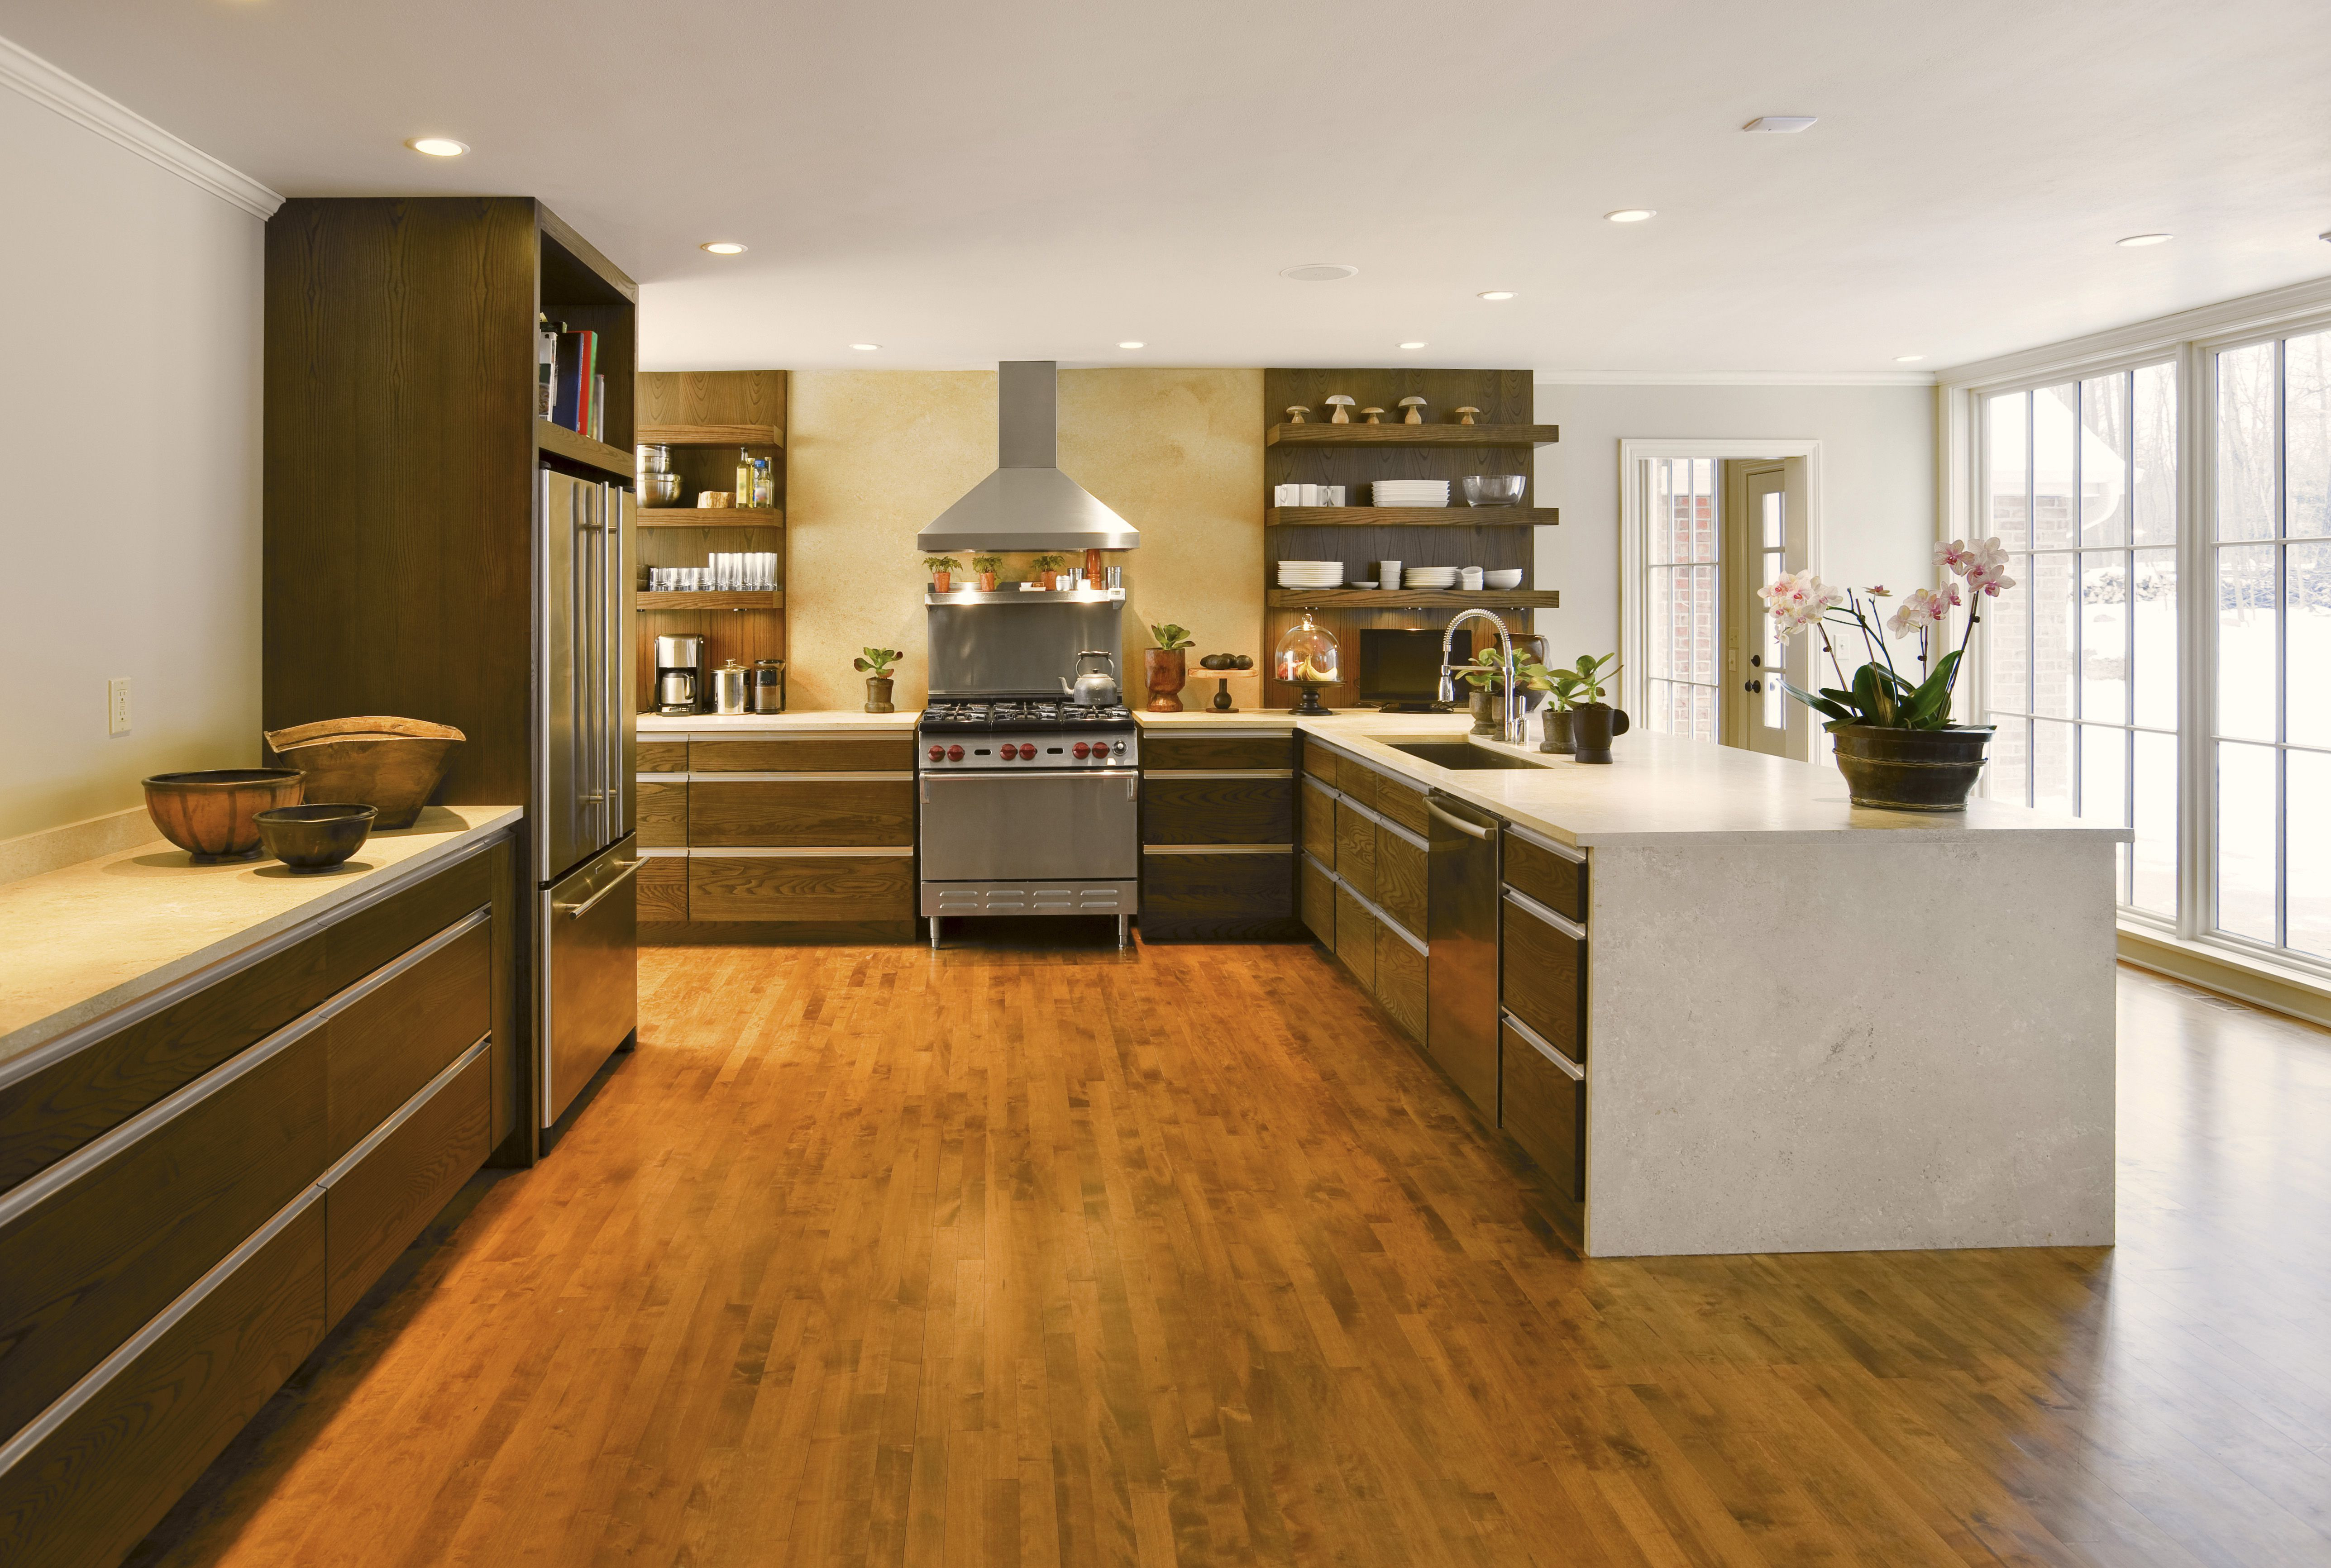 24 Stunning Should I Put Hardwood Floors In Kitchen 2024 free download should i put hardwood floors in kitchen of the best flooring options for senior citizens with modern kitchen 88801369 59fd2f77b39d0300191aa03c